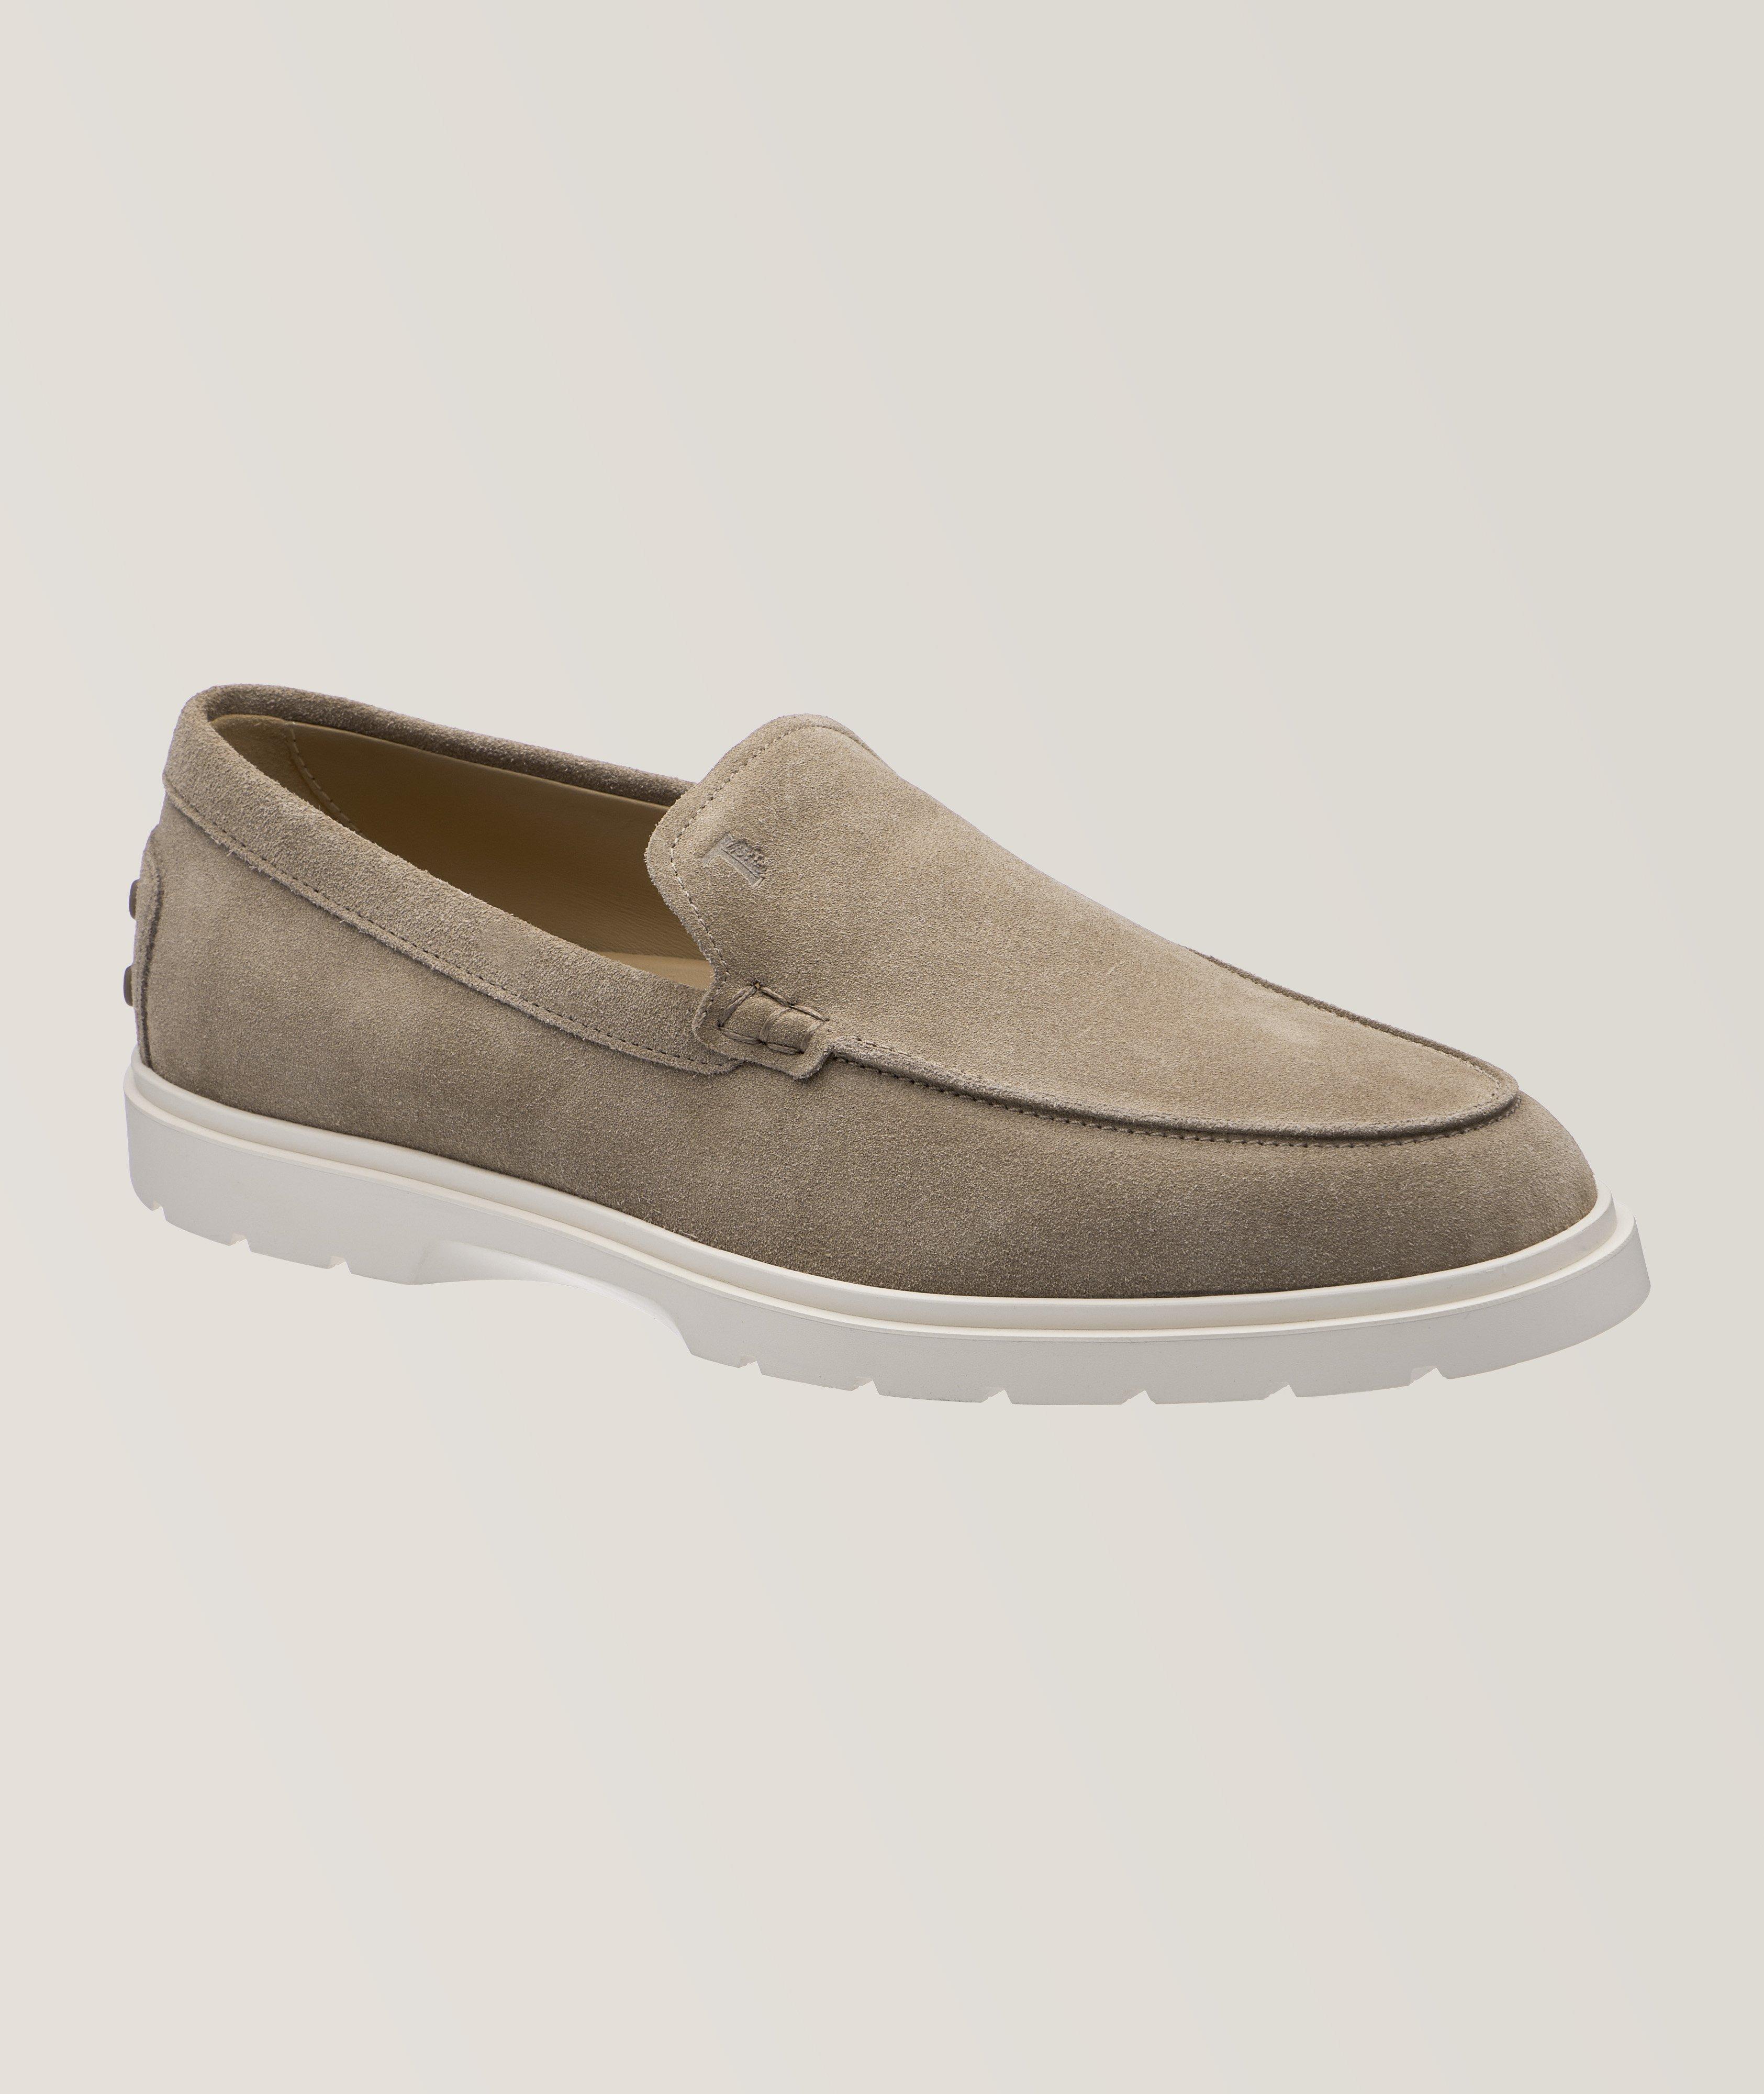 Suede Slipper Loafers image 0